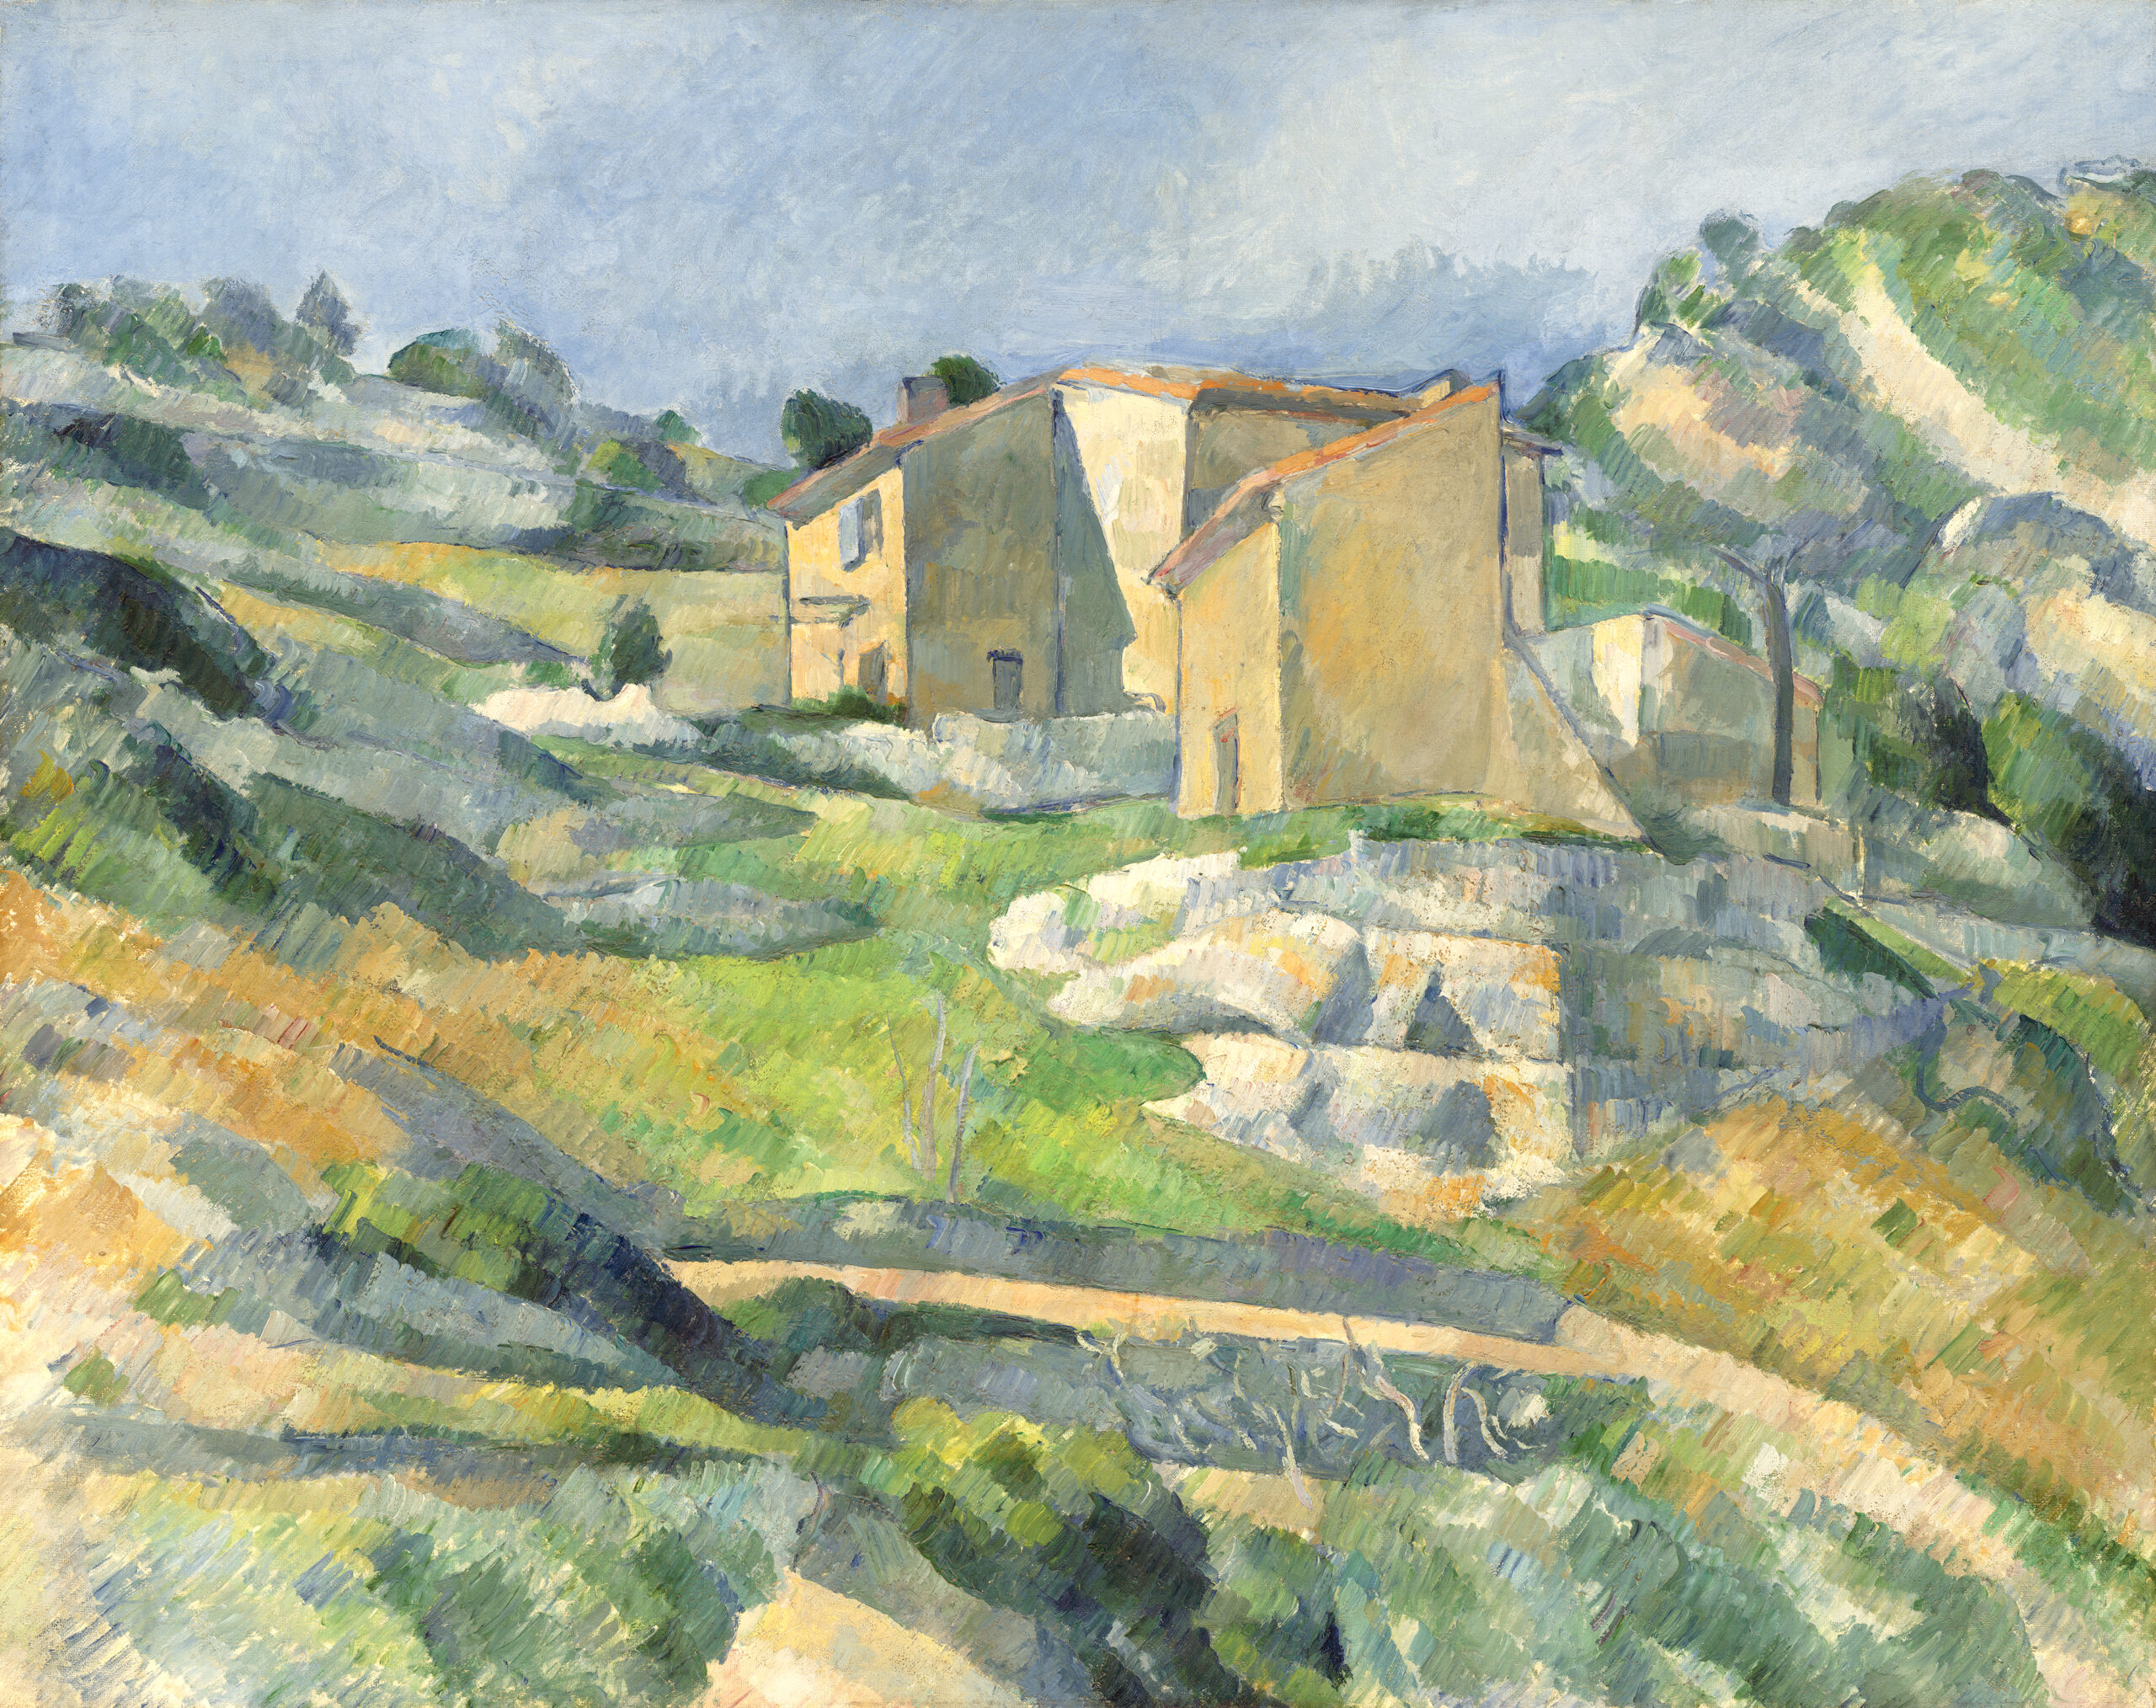 Houses in Provence: The Riaux Valley near L'Estaque (ca. 1883) by Paul Cézanne.